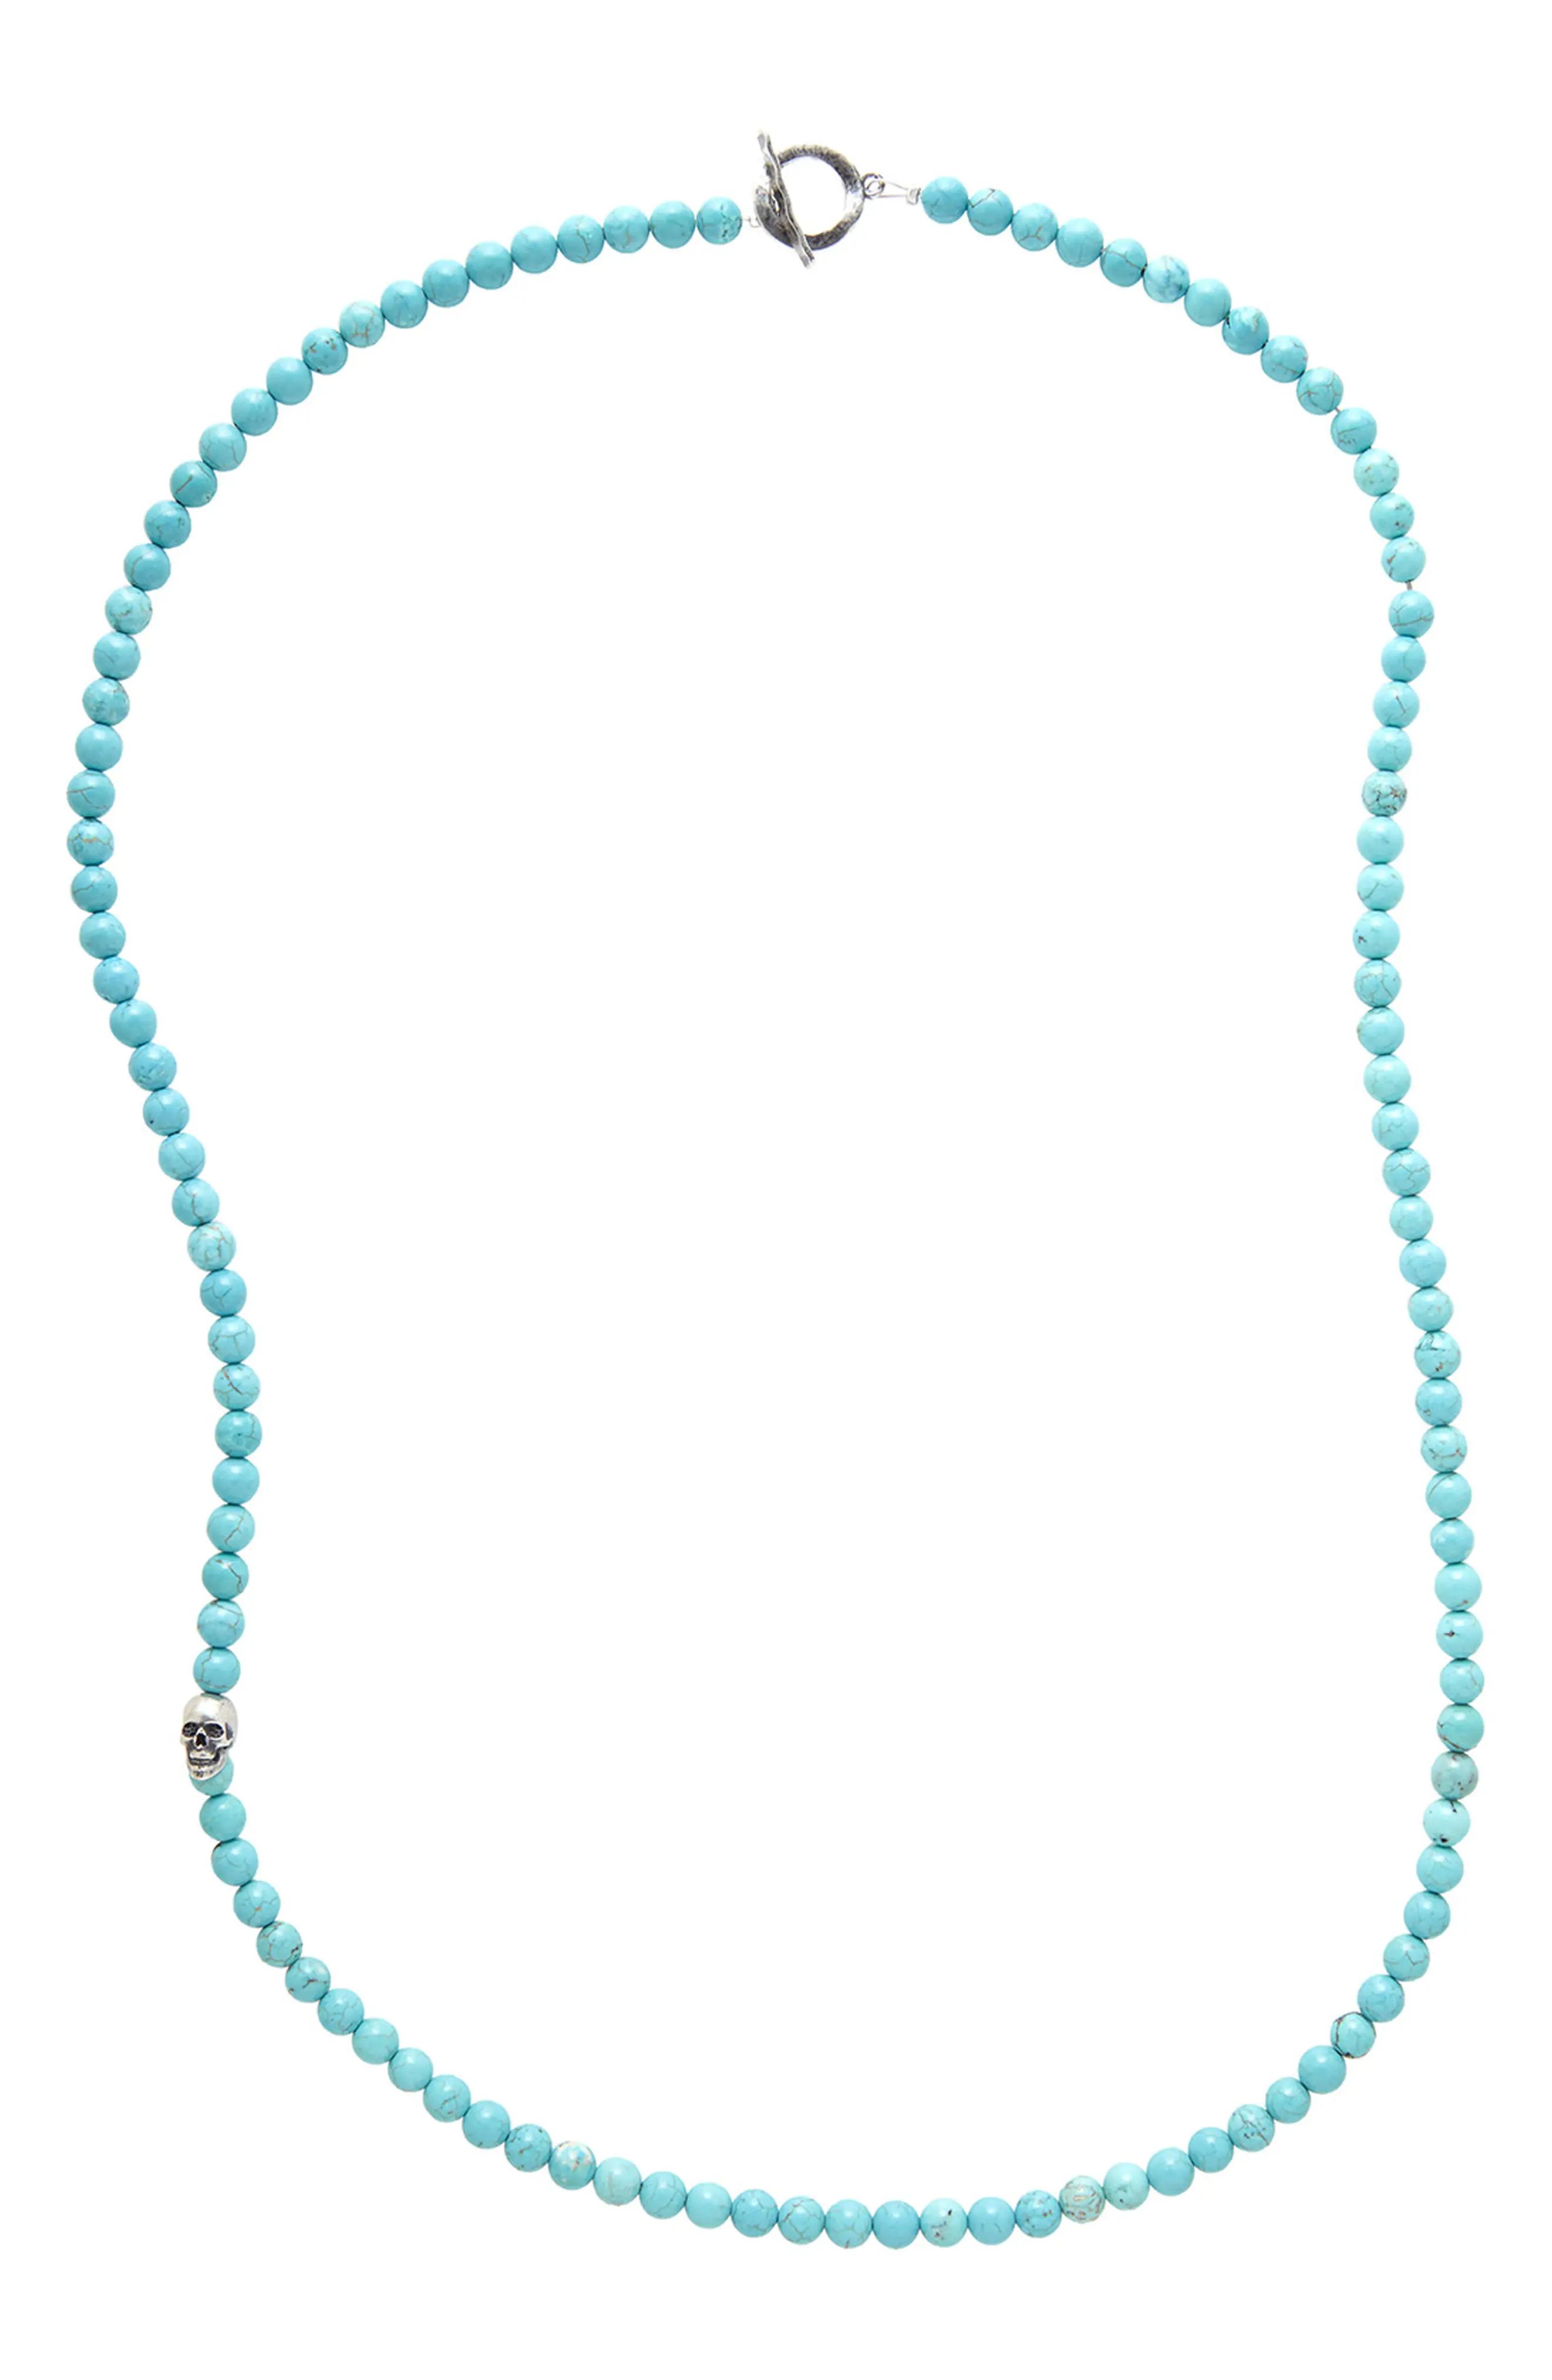 Turquoise Bead Necklace | Nordstrom